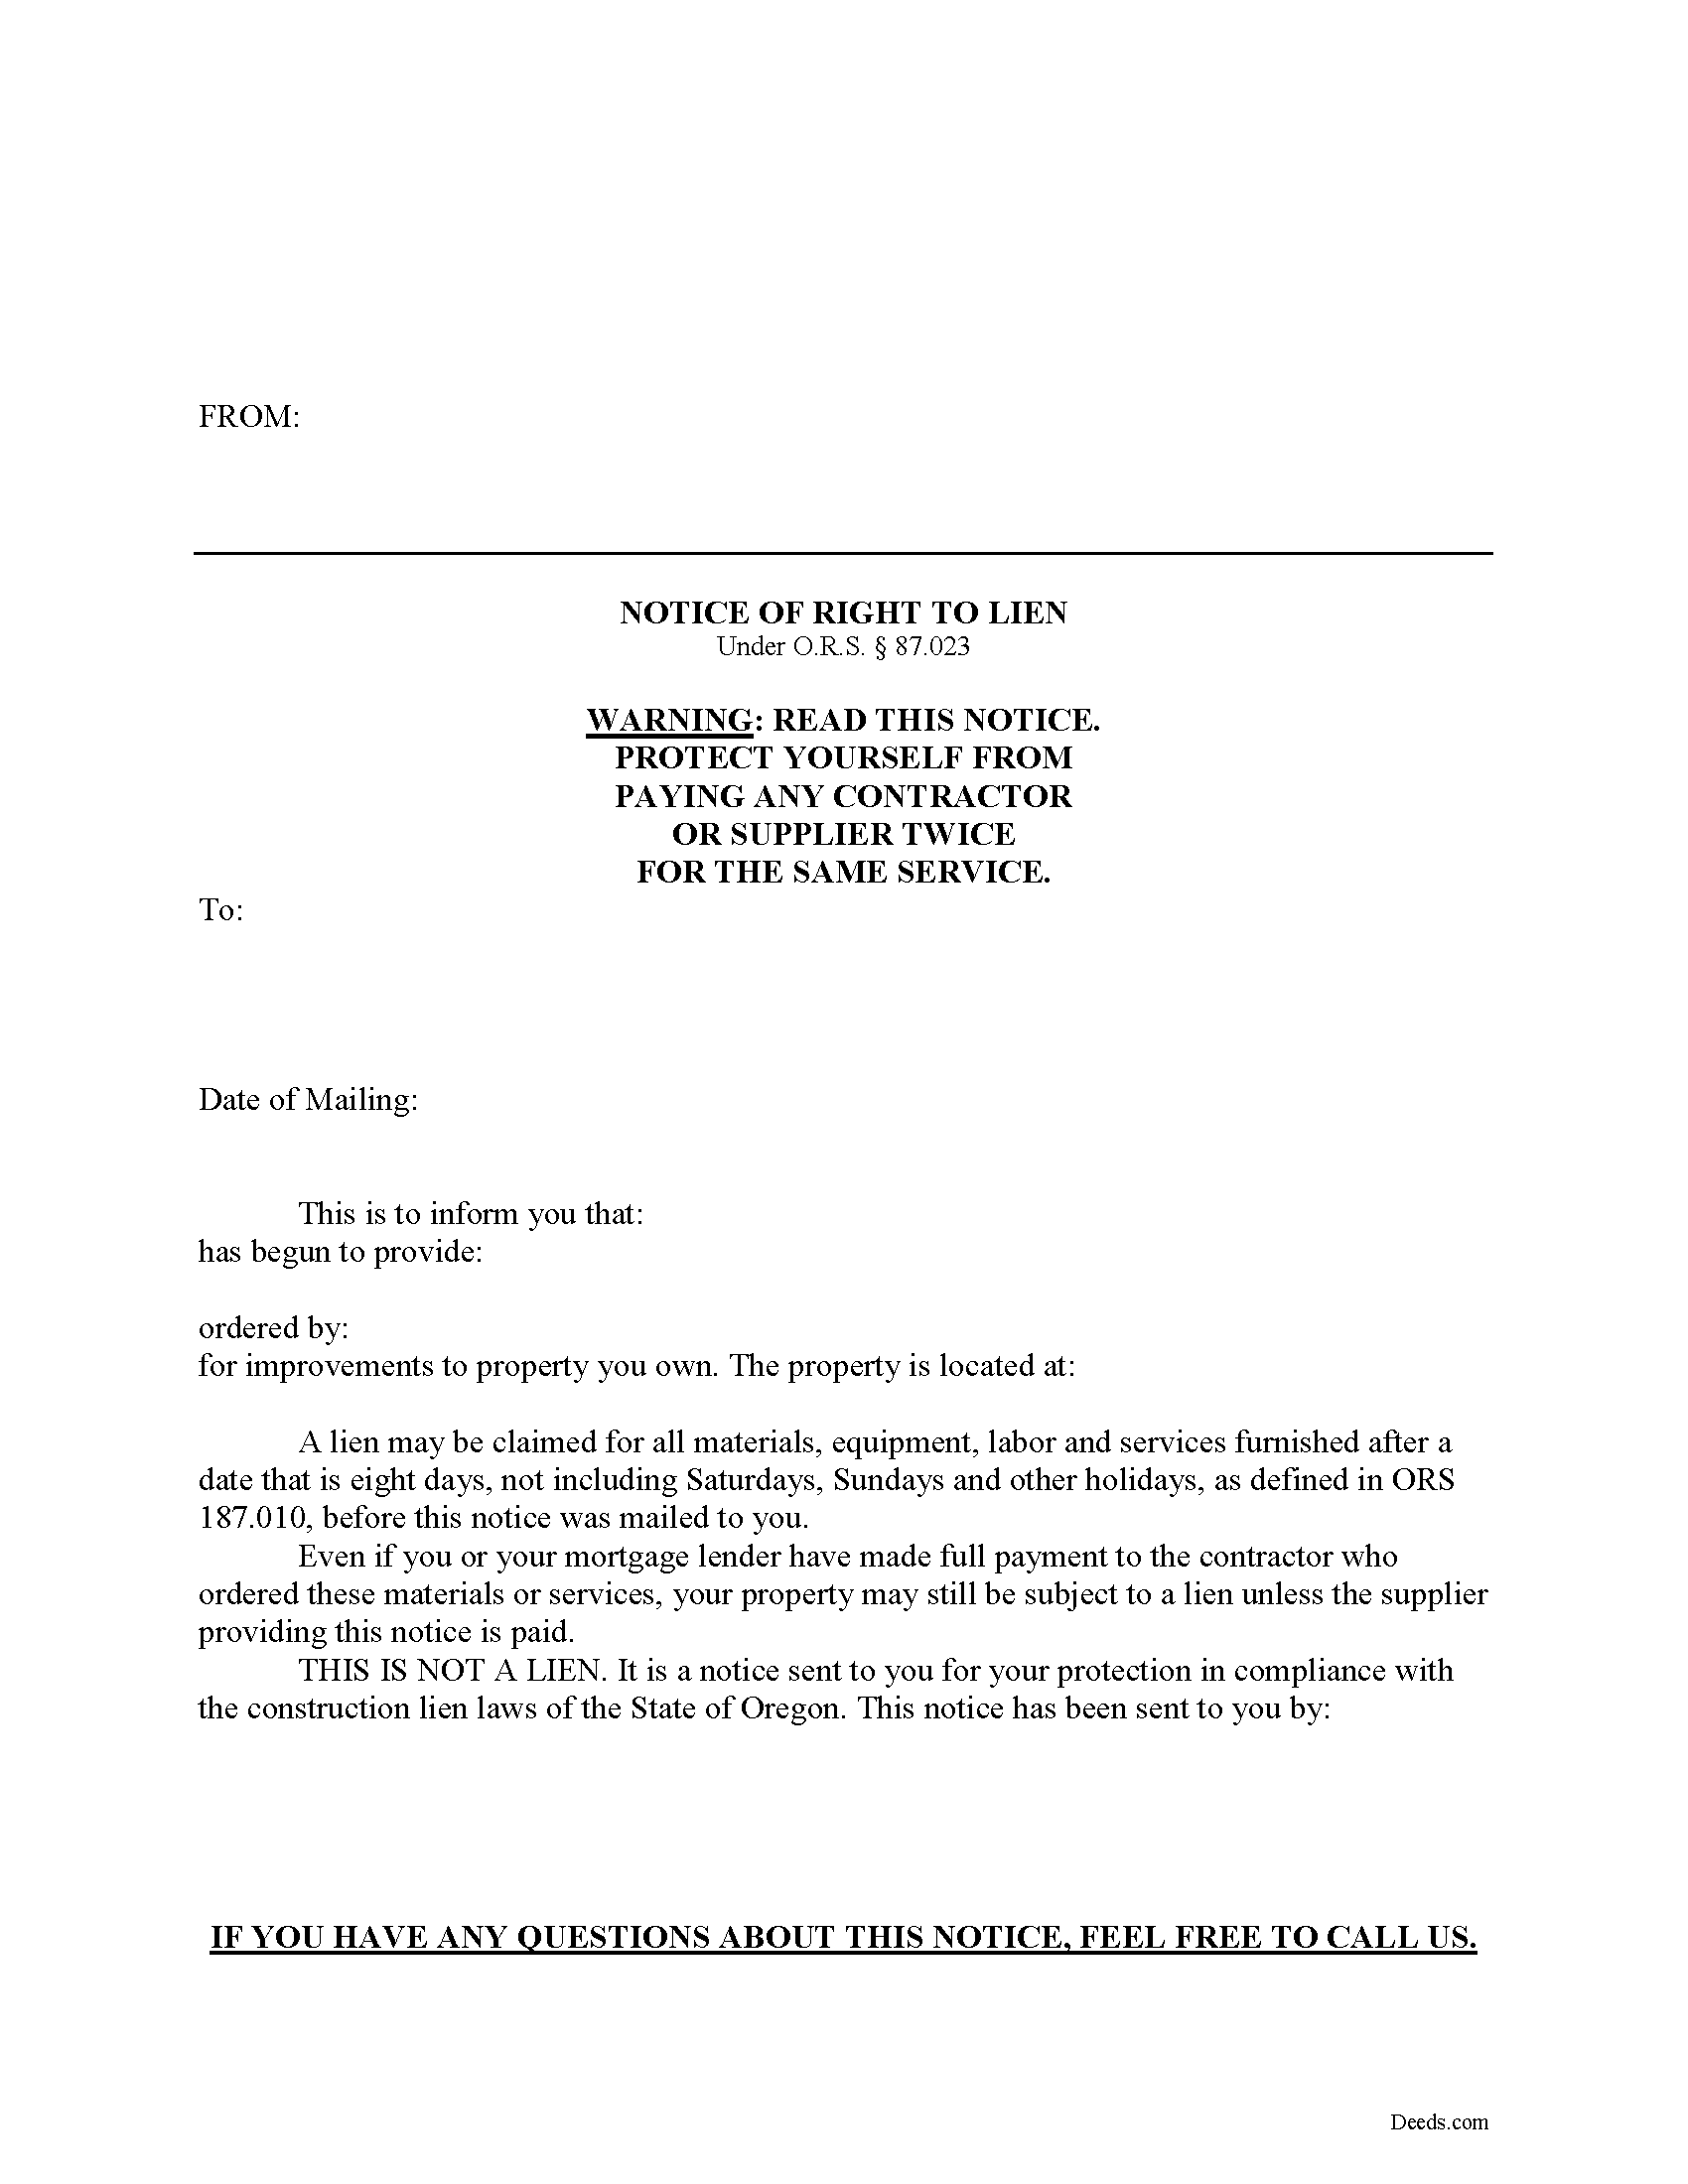 Notice of Right to Lien